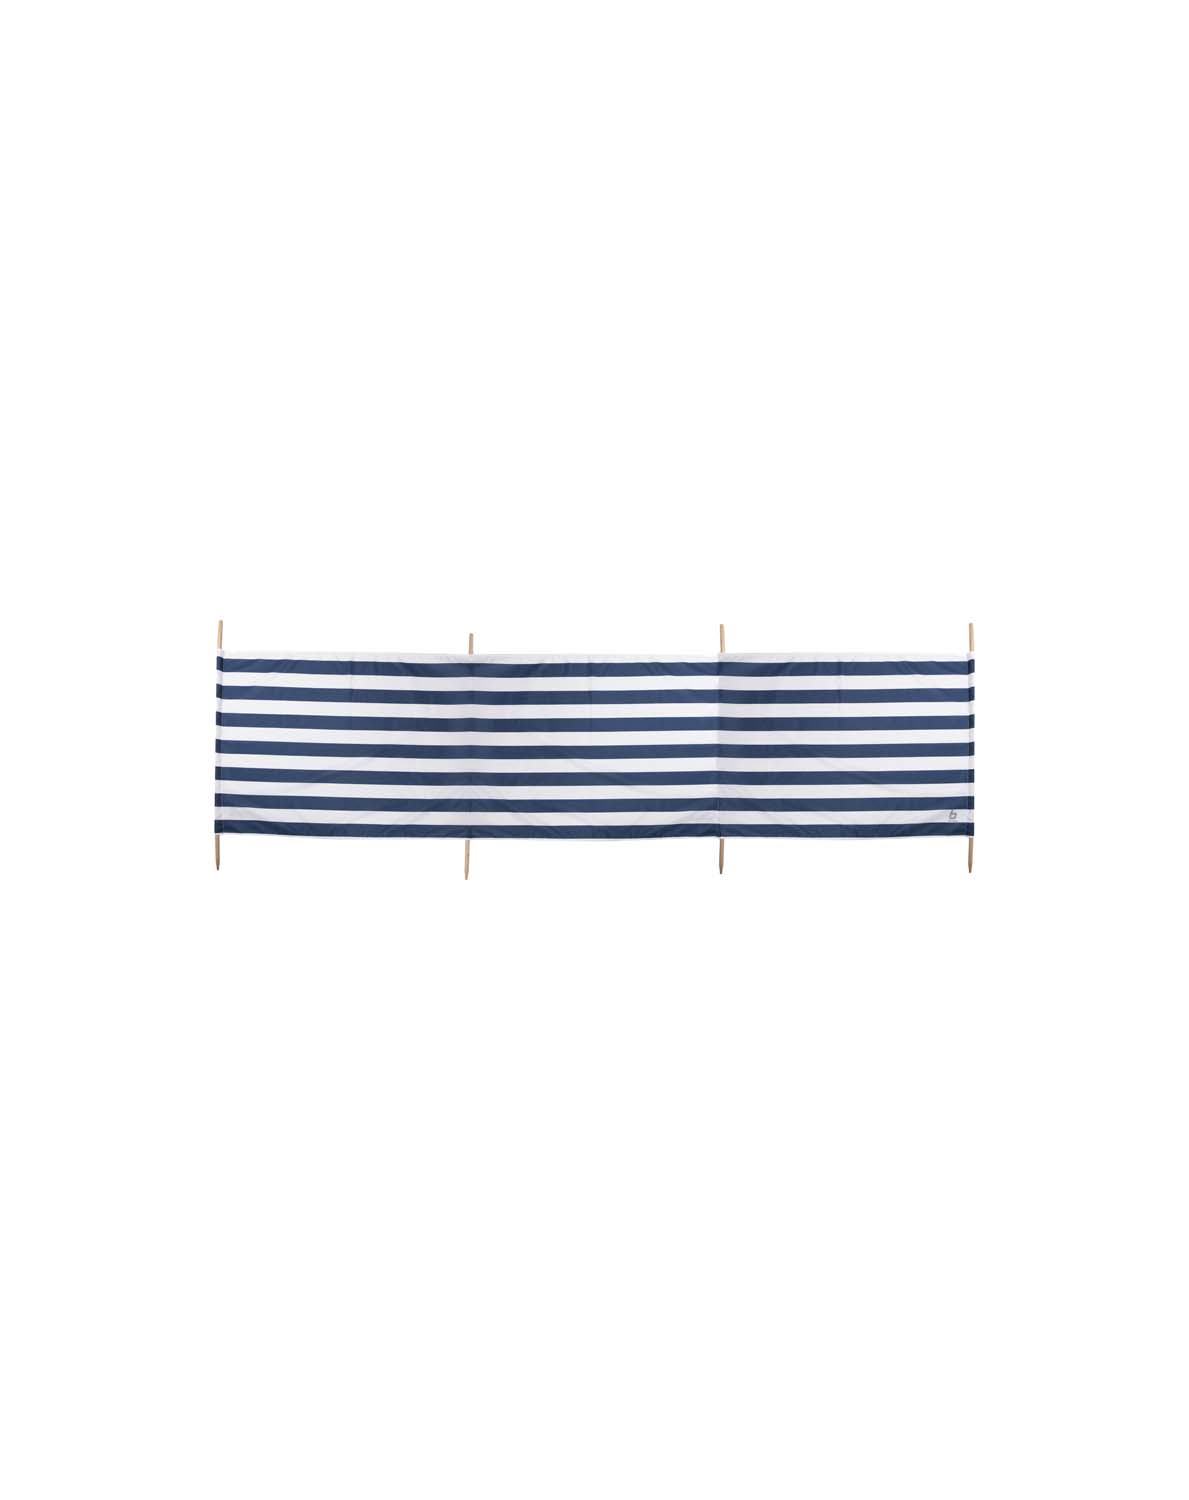 4367678 A striped 3-pocket beach windbreak. Ideal against the wind, sun or for sitting out of sight on the beach. The windbreak includes wooden poles that have a height of 117 cm. The fabric is sturdy with the material of 160 g/m2 polyester.